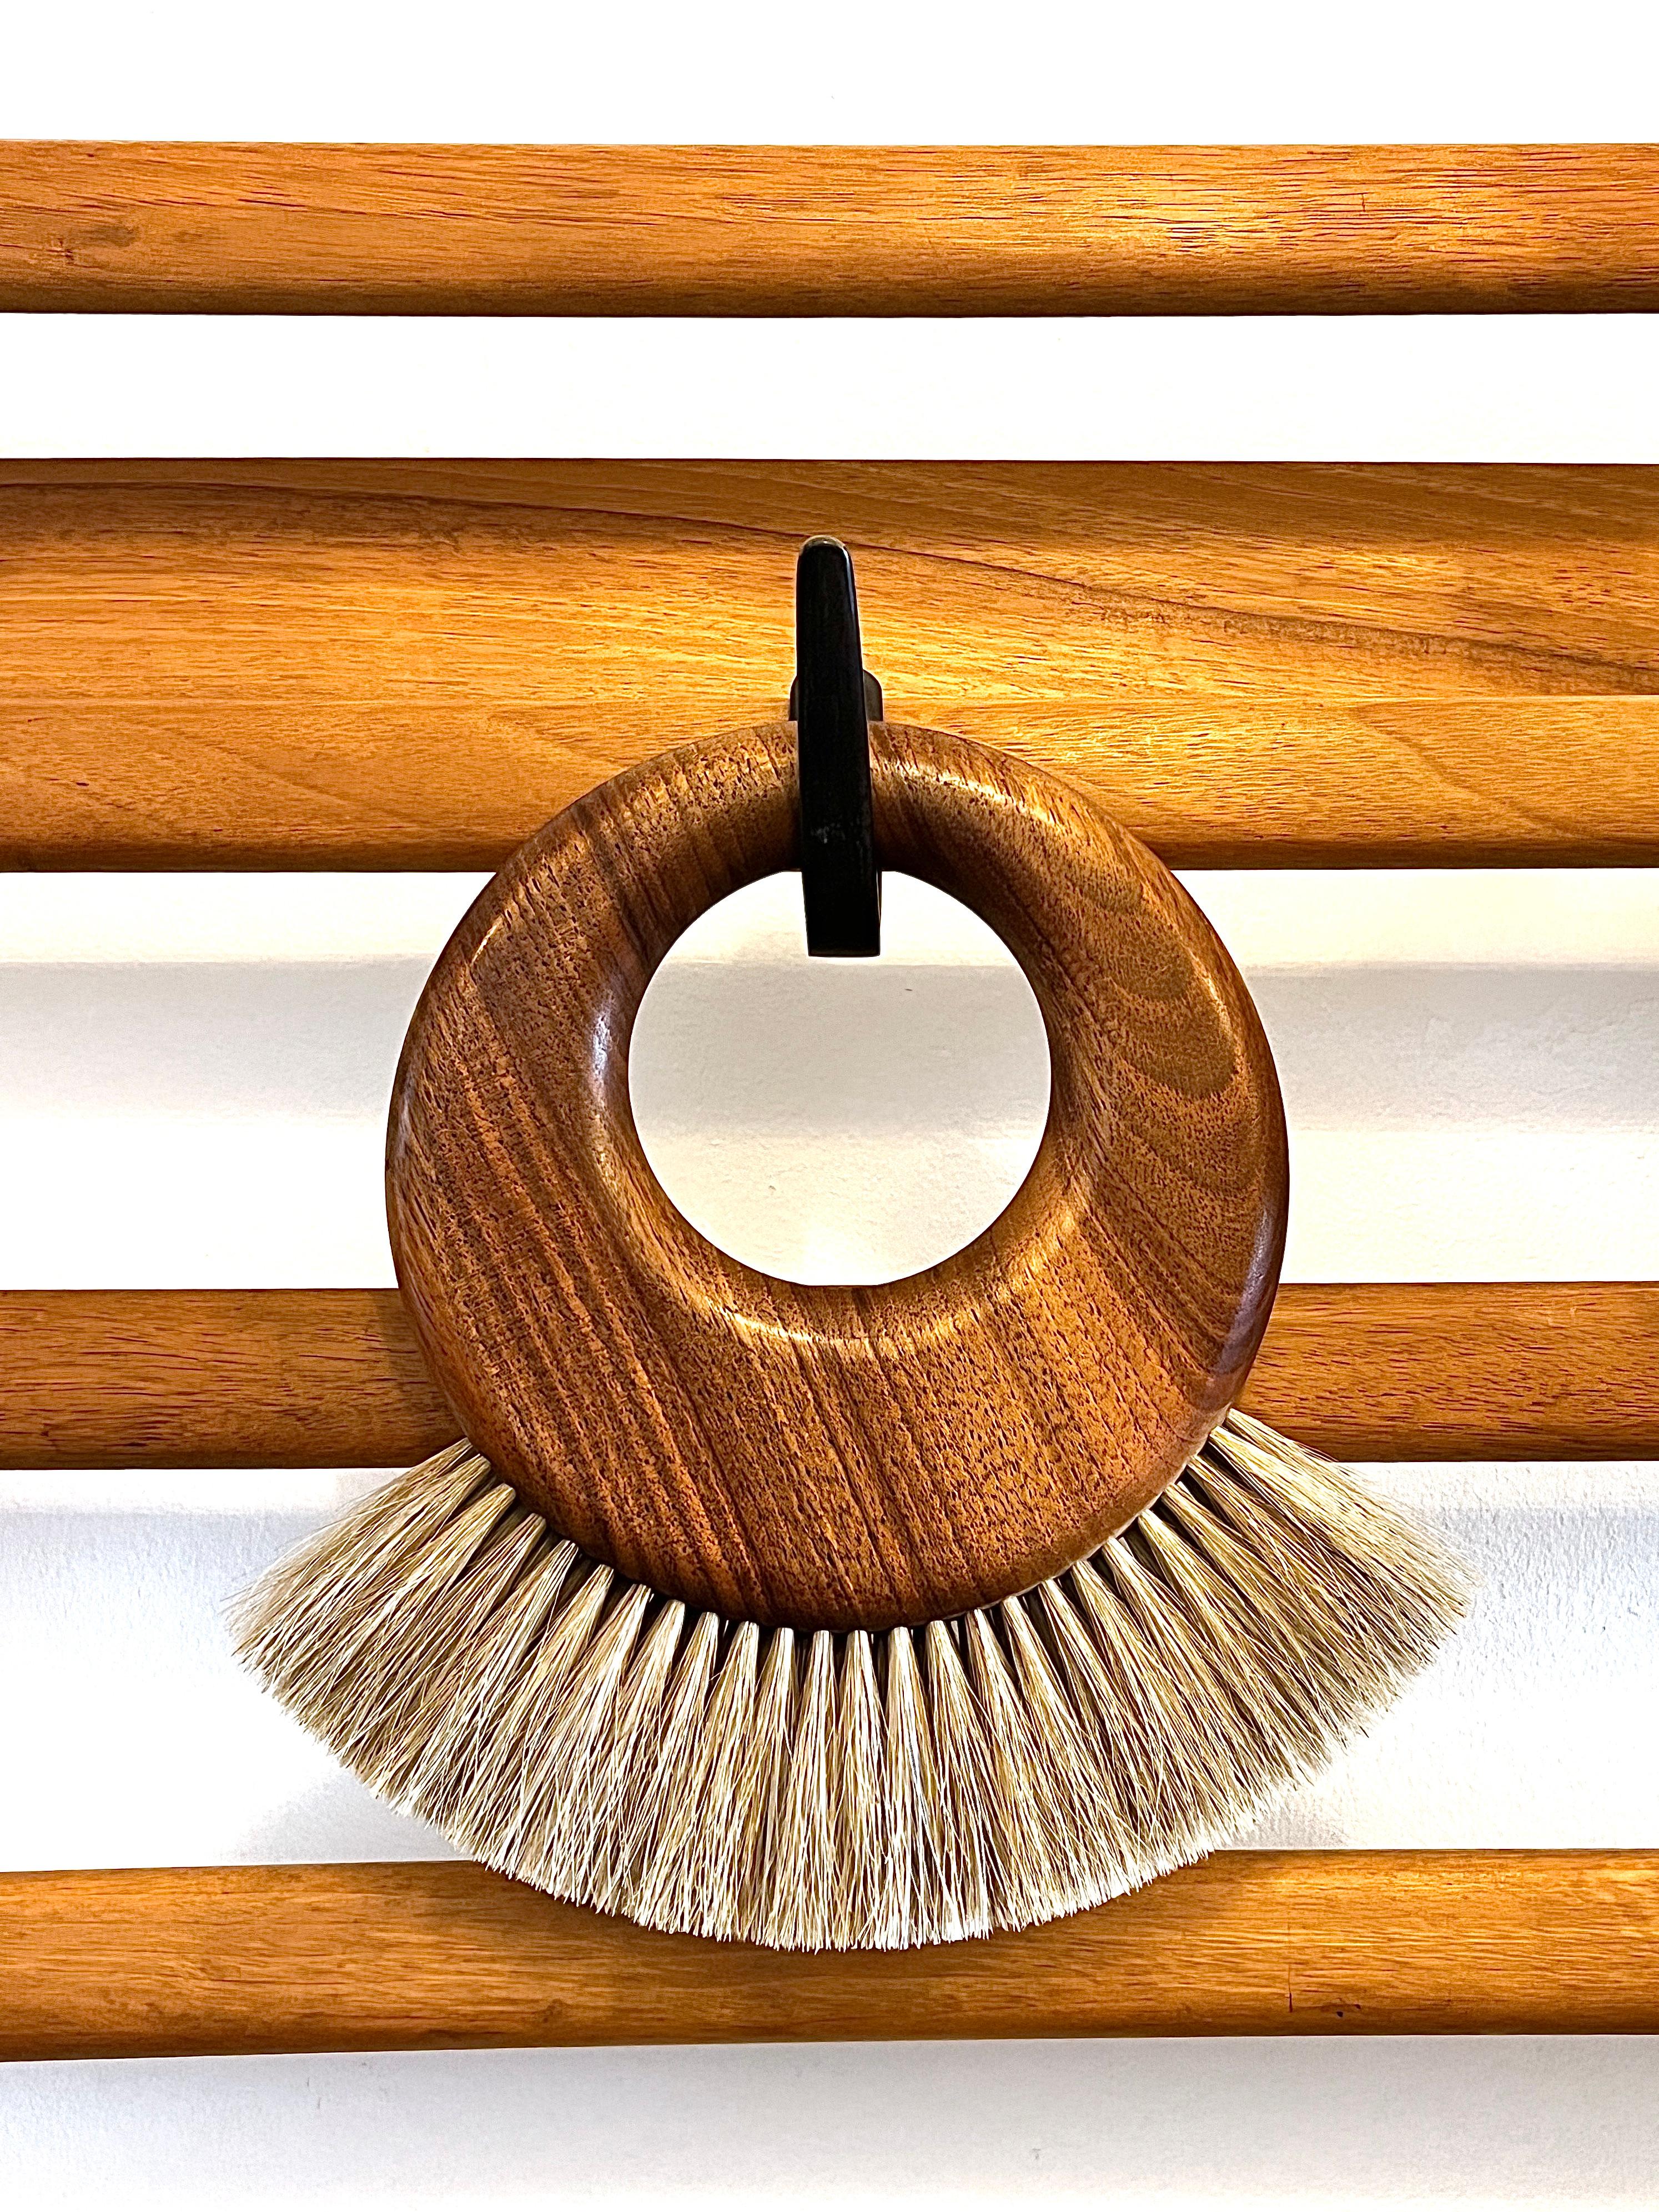 Large Carl Aubock Midcentury Walnut Ring Clothes Brush, Austria, 1950s In Good Condition For Sale In Vienna, AT